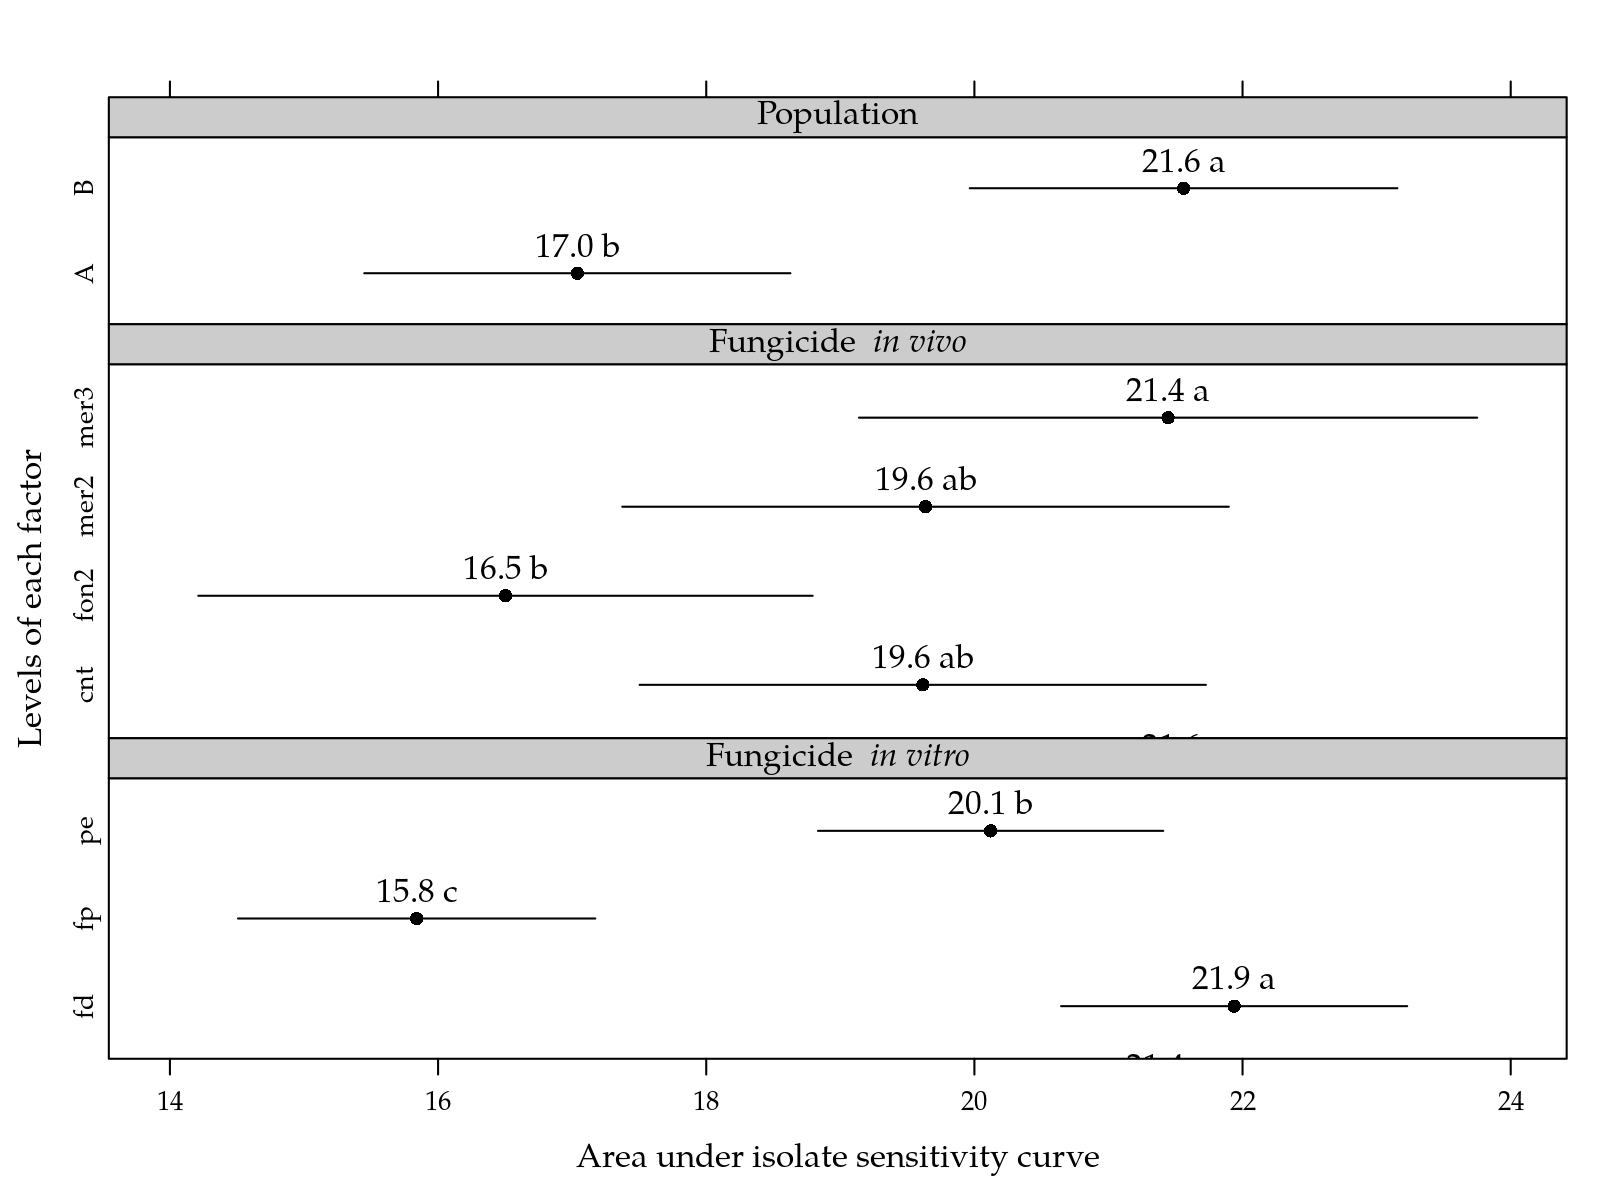 Figure  6: Area under isolate sensitivity curve for levels of population, *in vivo* fungicide and *in vitro* fungicide. Pairs of means in a factor followed by the same letter are not statistically different at 5% significance level.